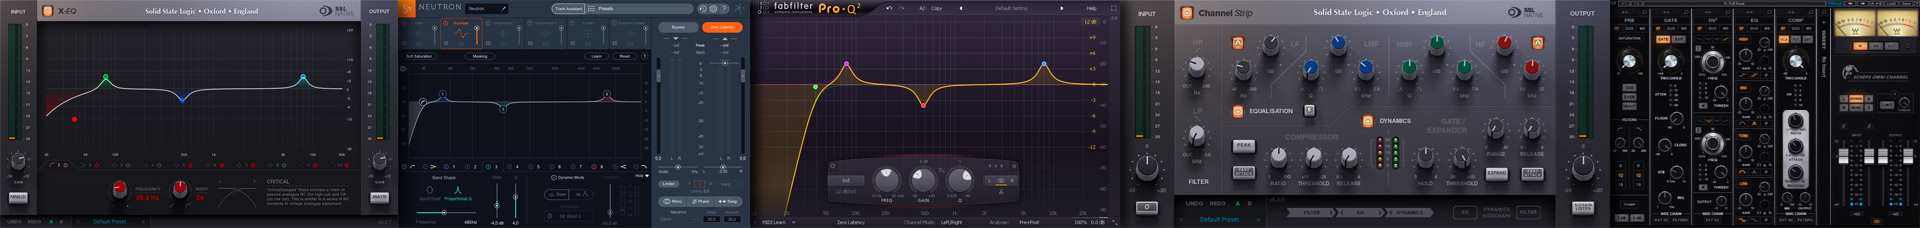 Best EQ plugins - equalizer from SSL, Fabfilter and Waves